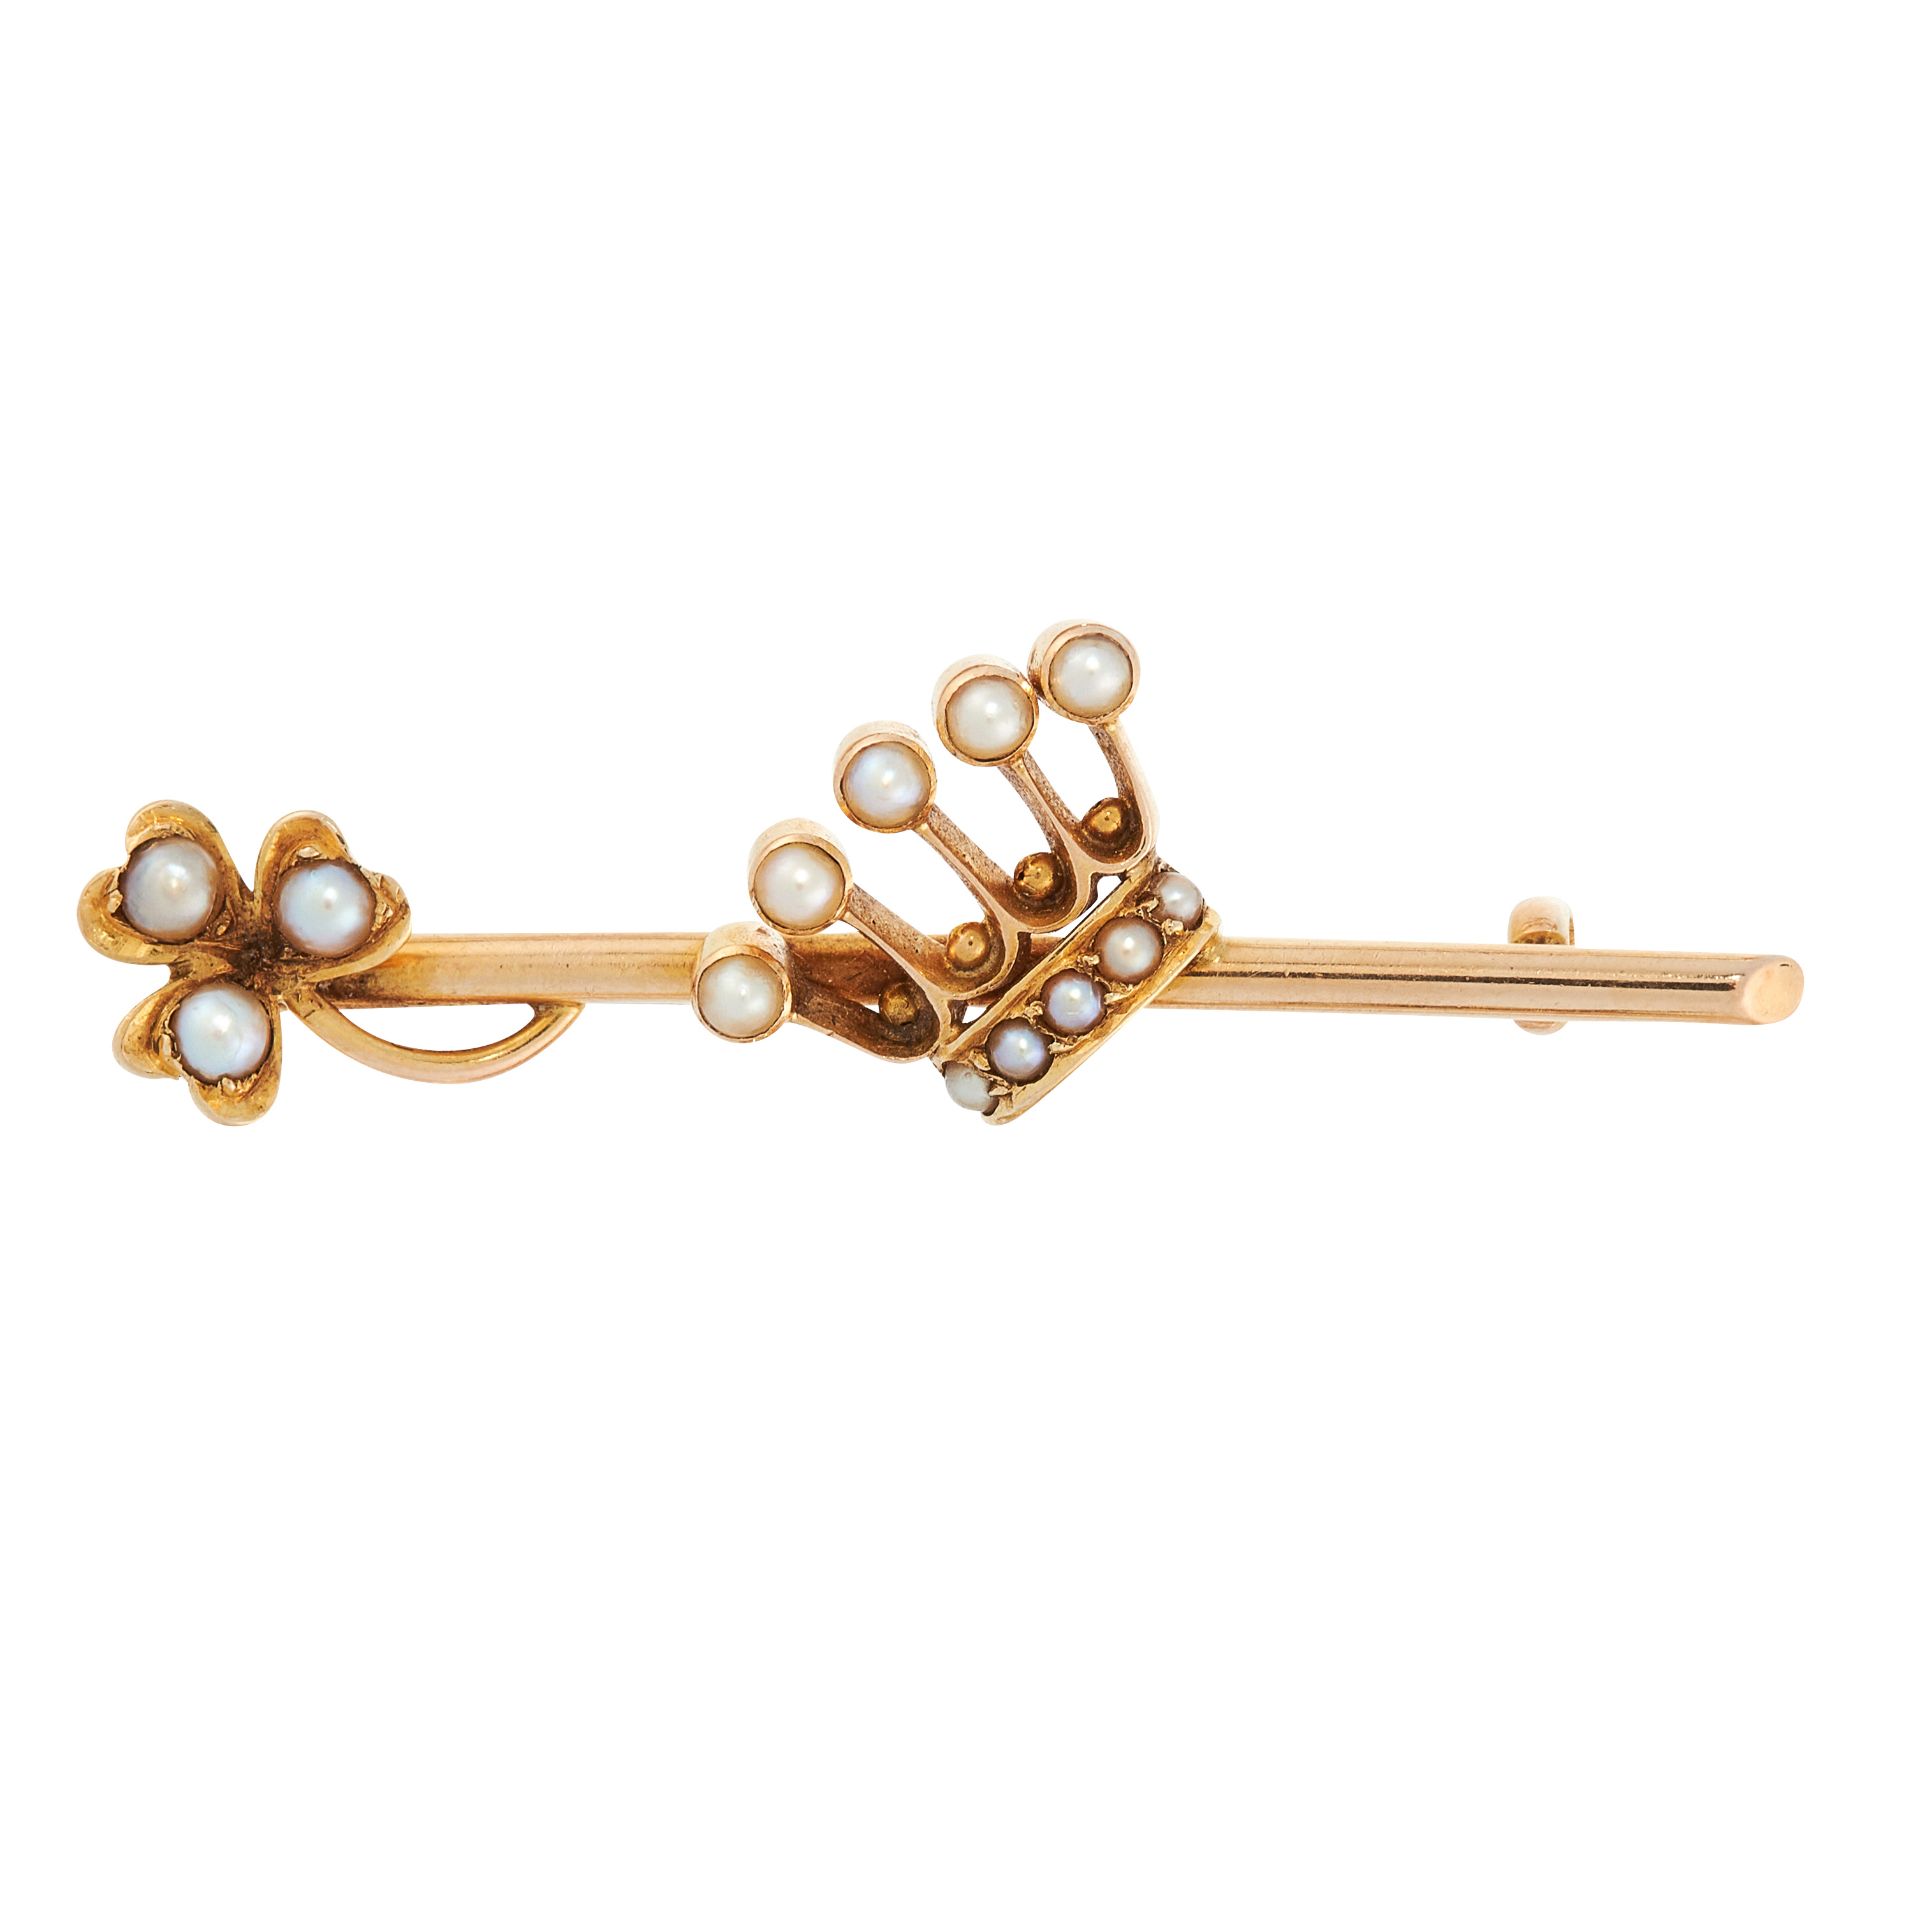 AN ANTIQUE VICTORIAN PEARL CROWN AND CLOVER BAR BROOCH in yellow gold, in the form of a crown and